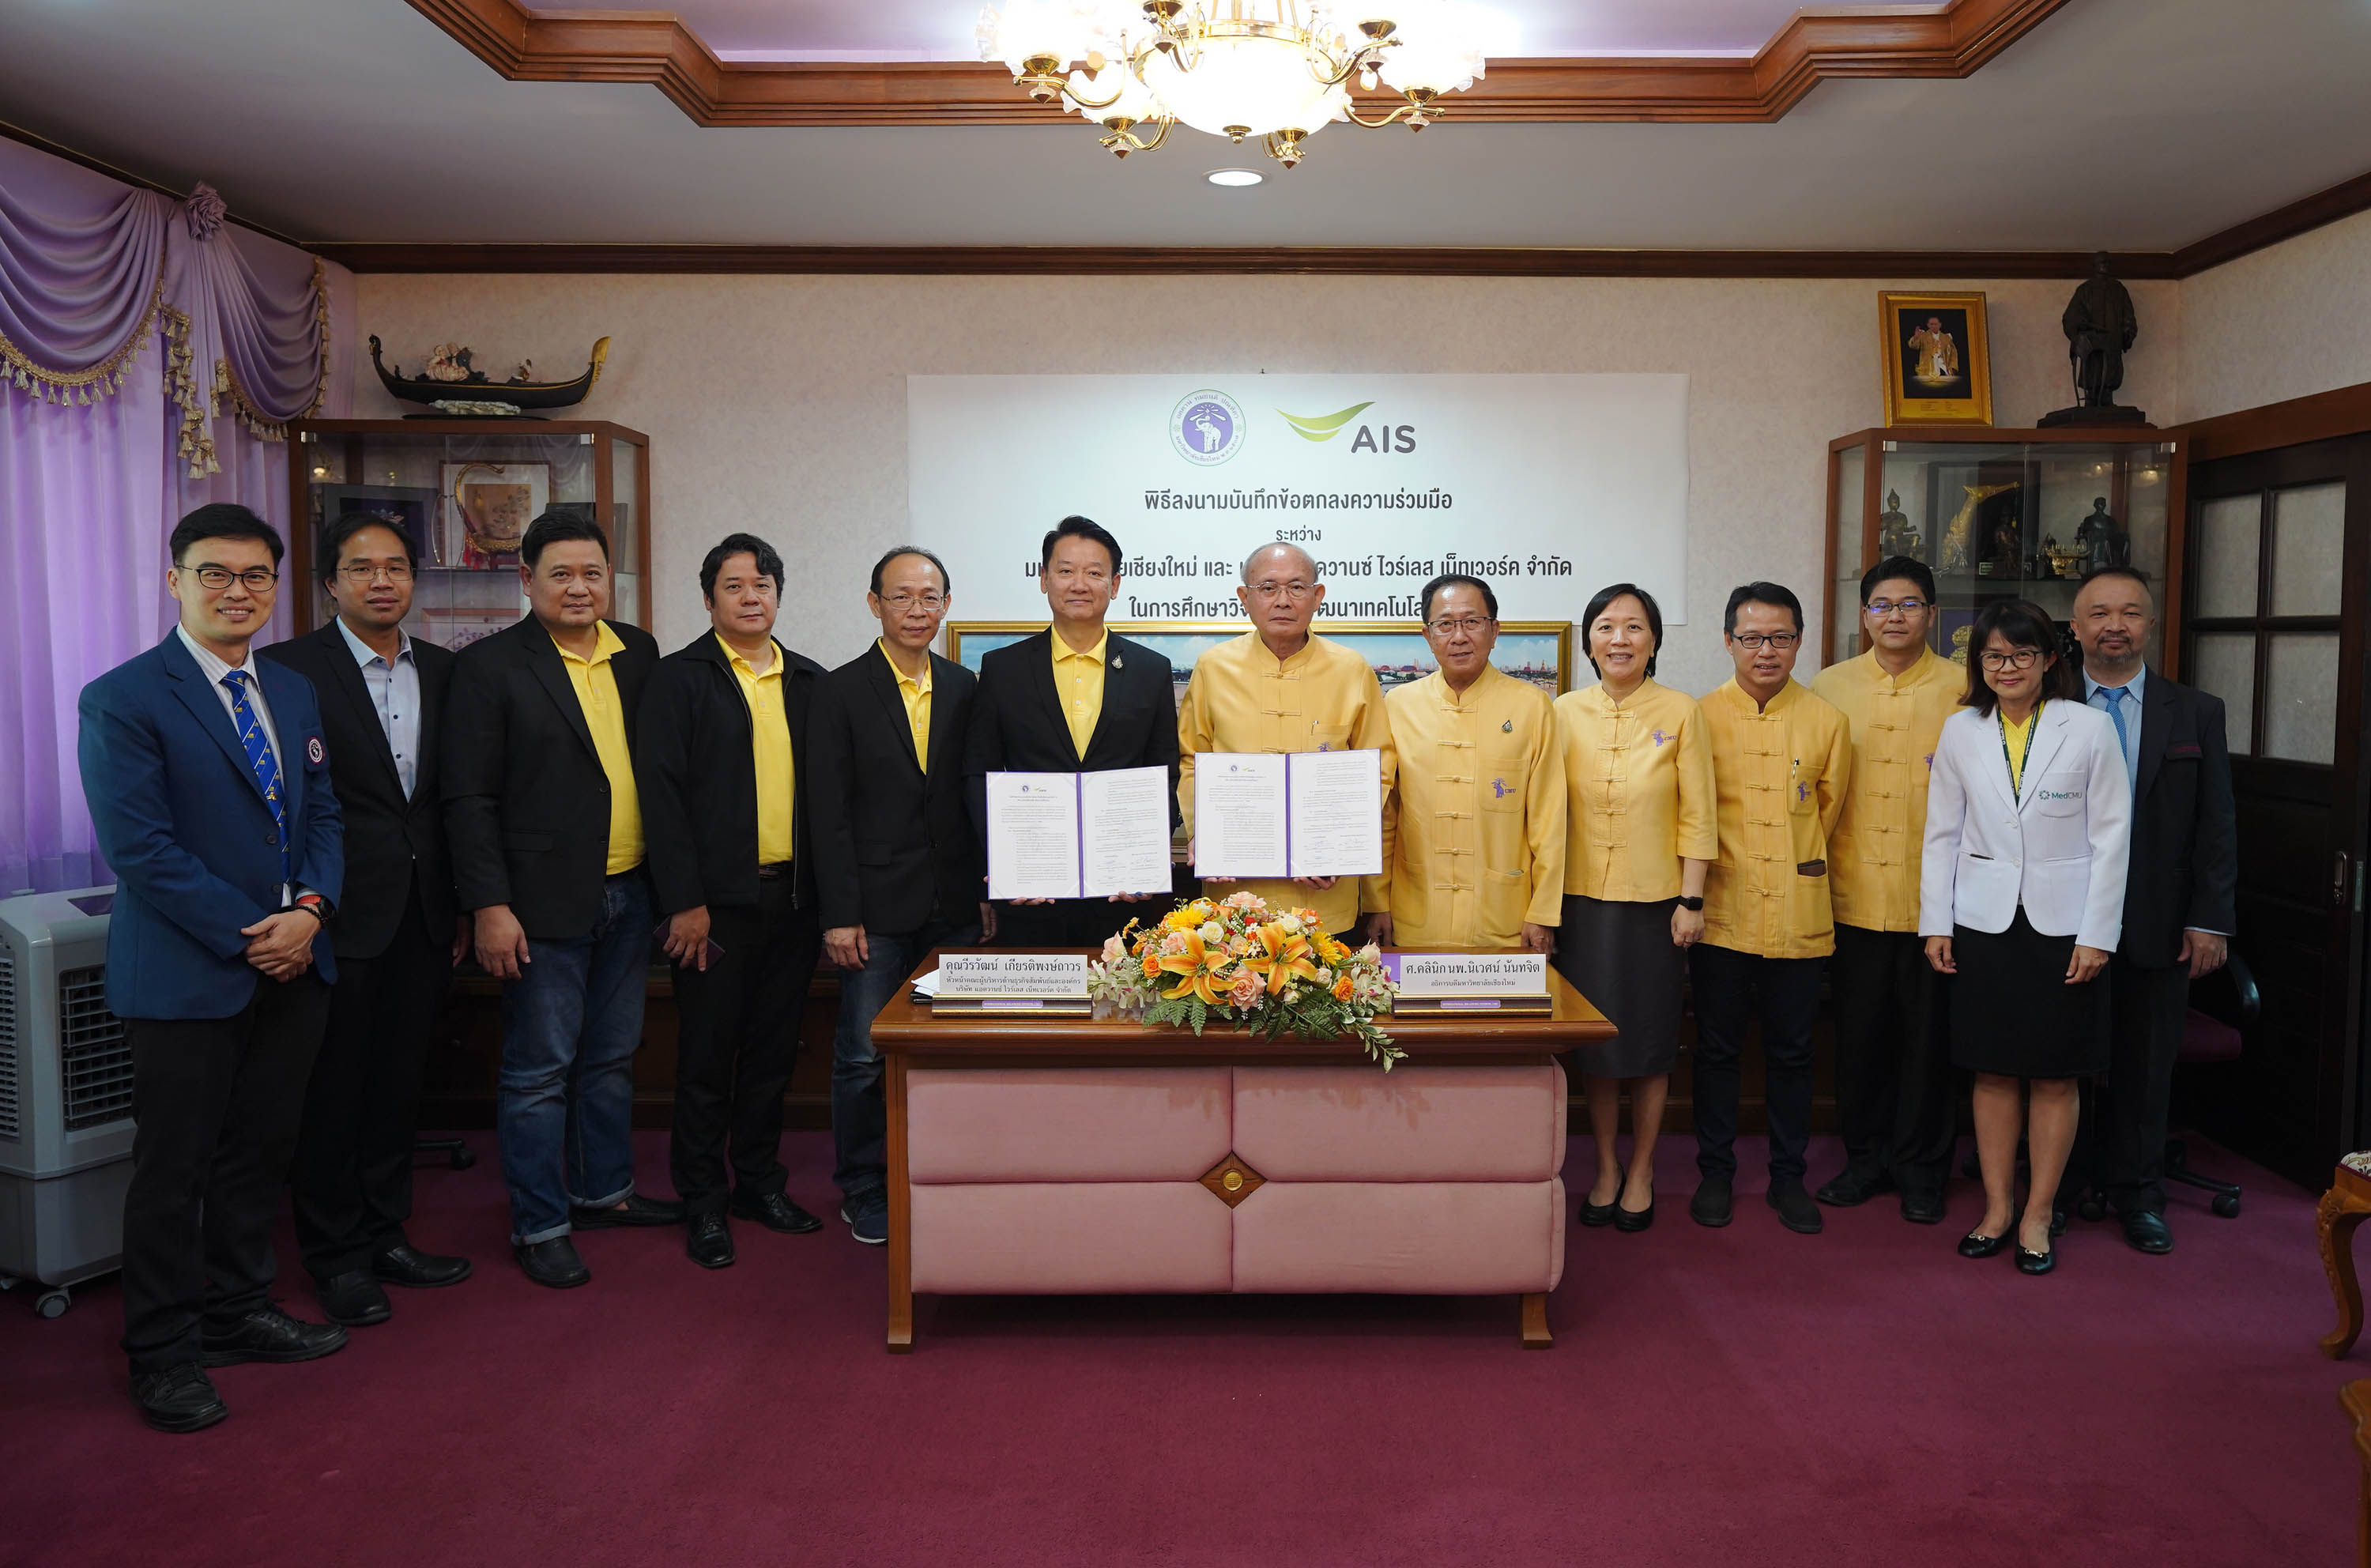 AIS joins Chiang Mai University signing MOU for 5G